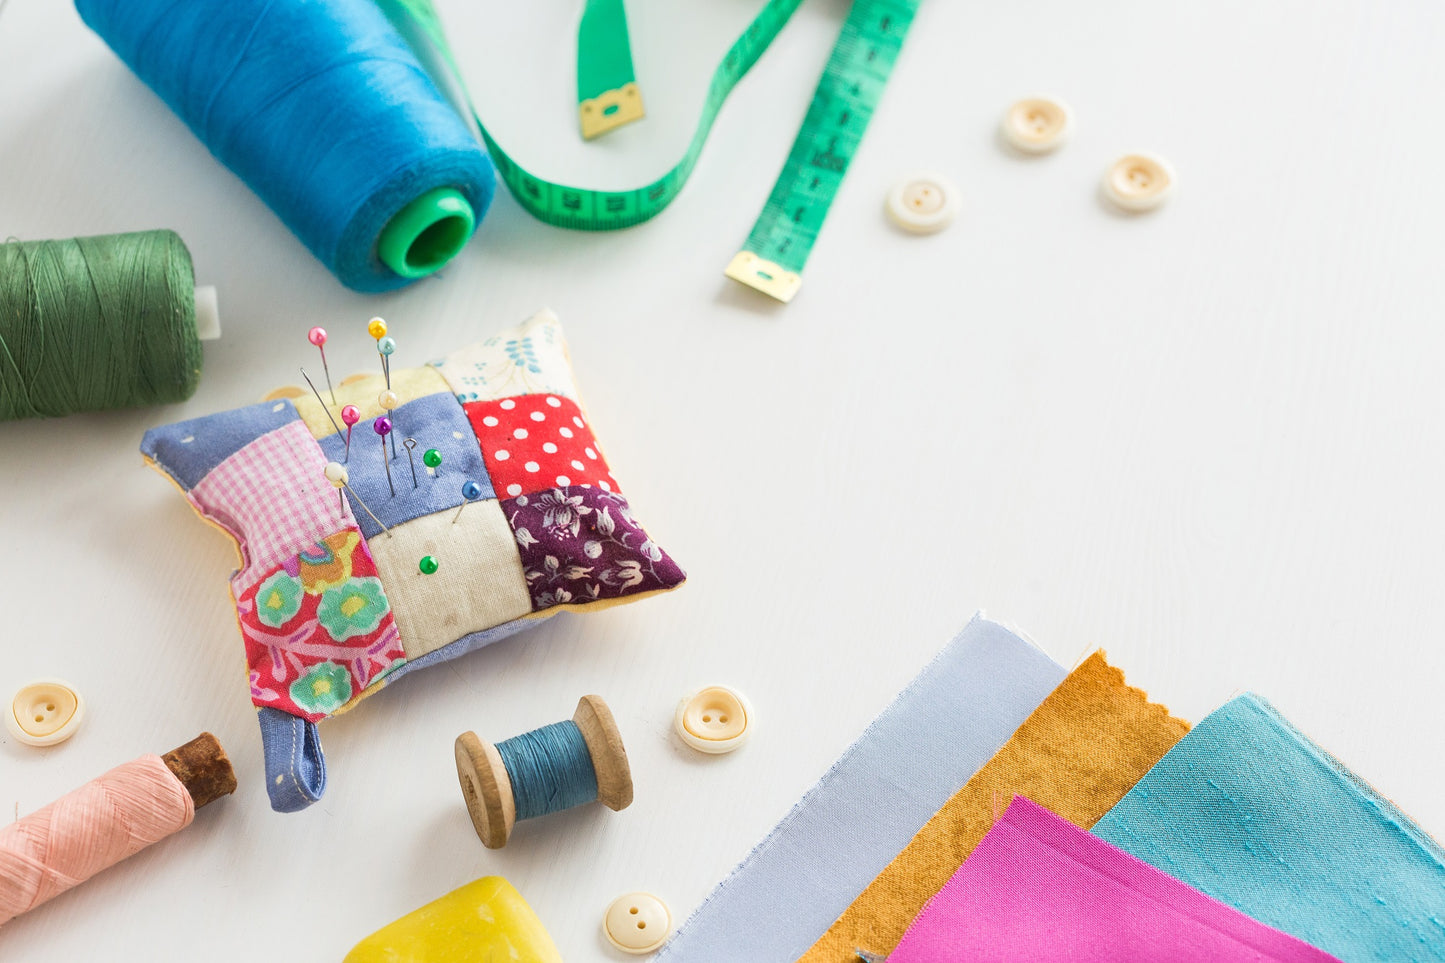 12 Coolest Ways to Use Fabric Scraps